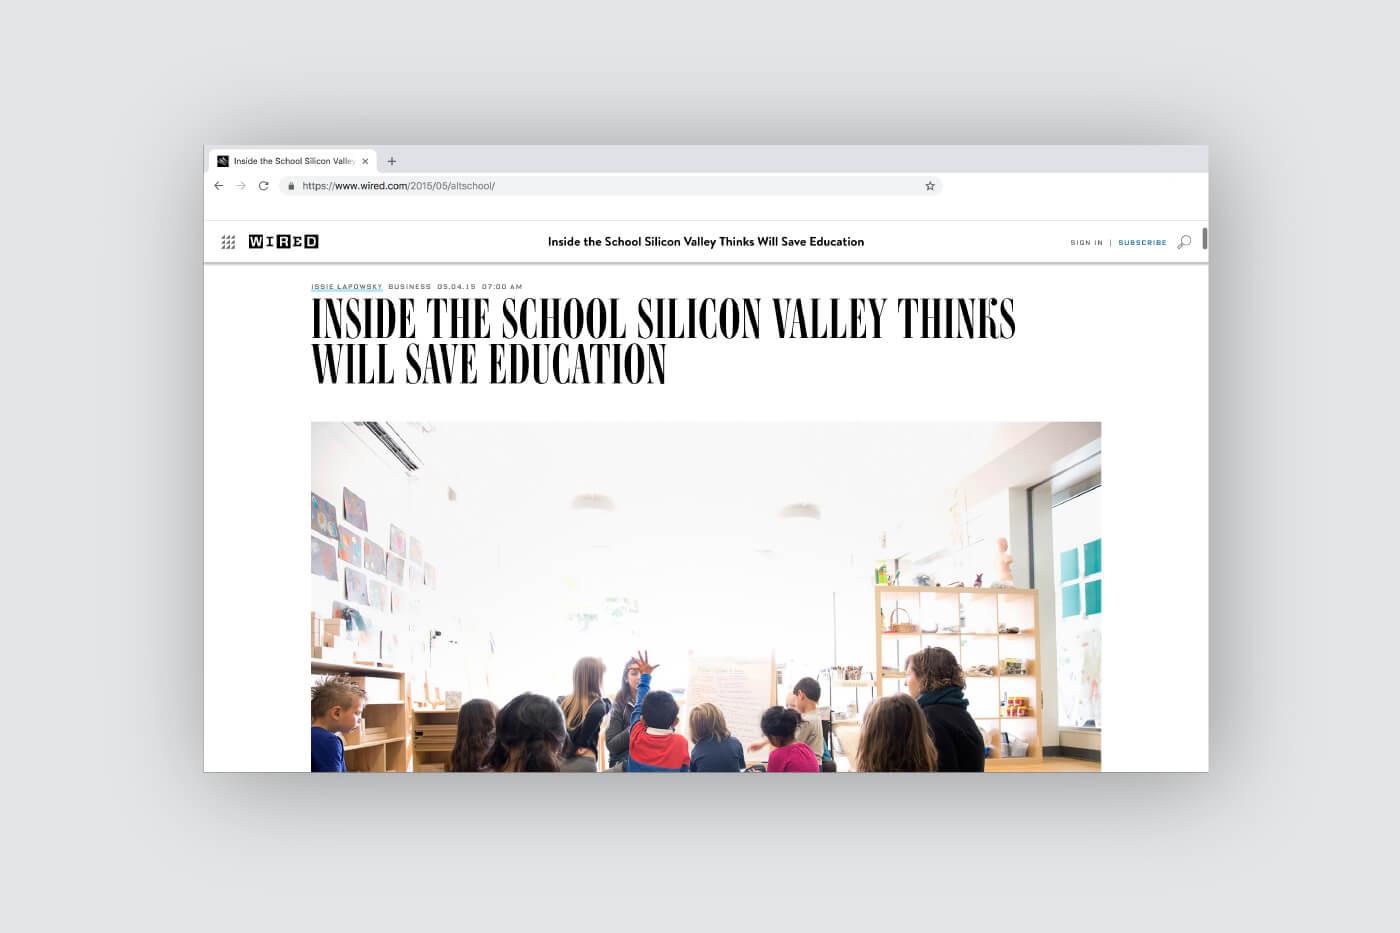 wired-article-altschool